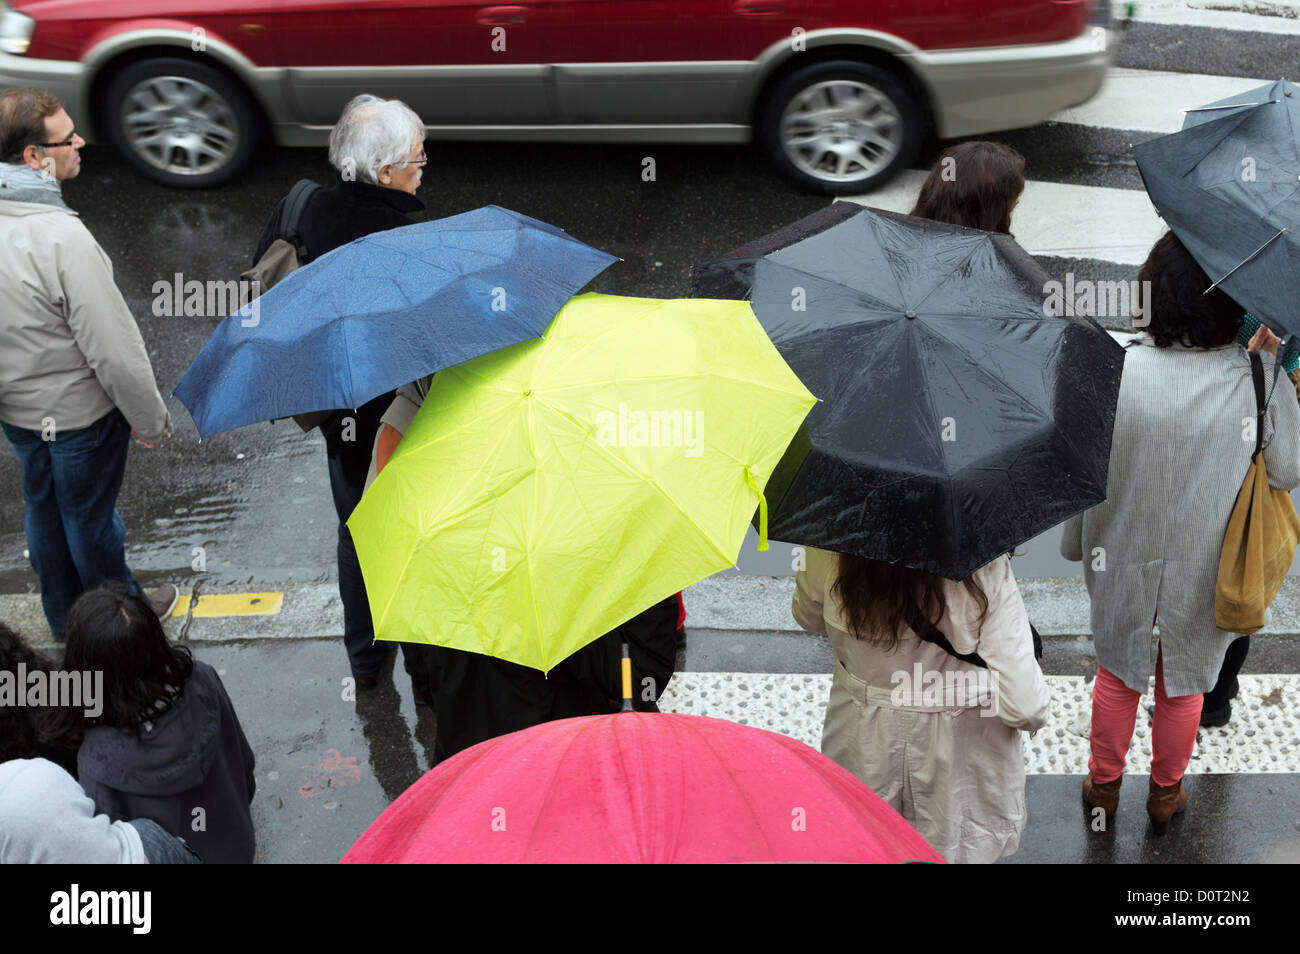 Paris, France: Pedestrians with umbrellas on a city street in the rain. Stock Photo